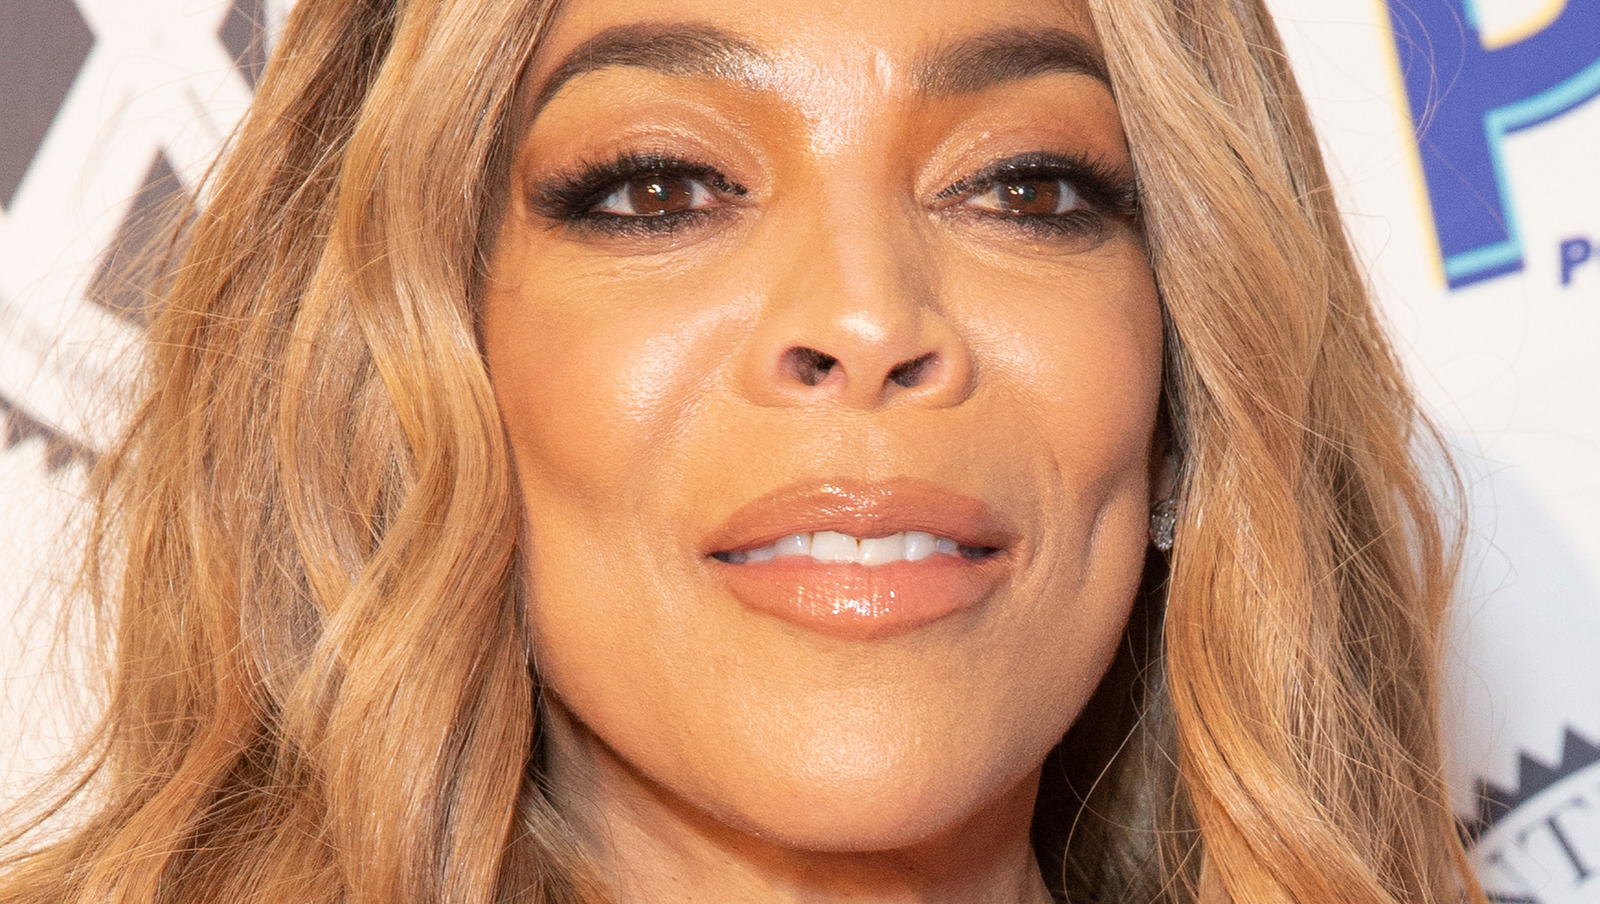 Is this Controversial Star Going to Fill in For Wendy Williams?